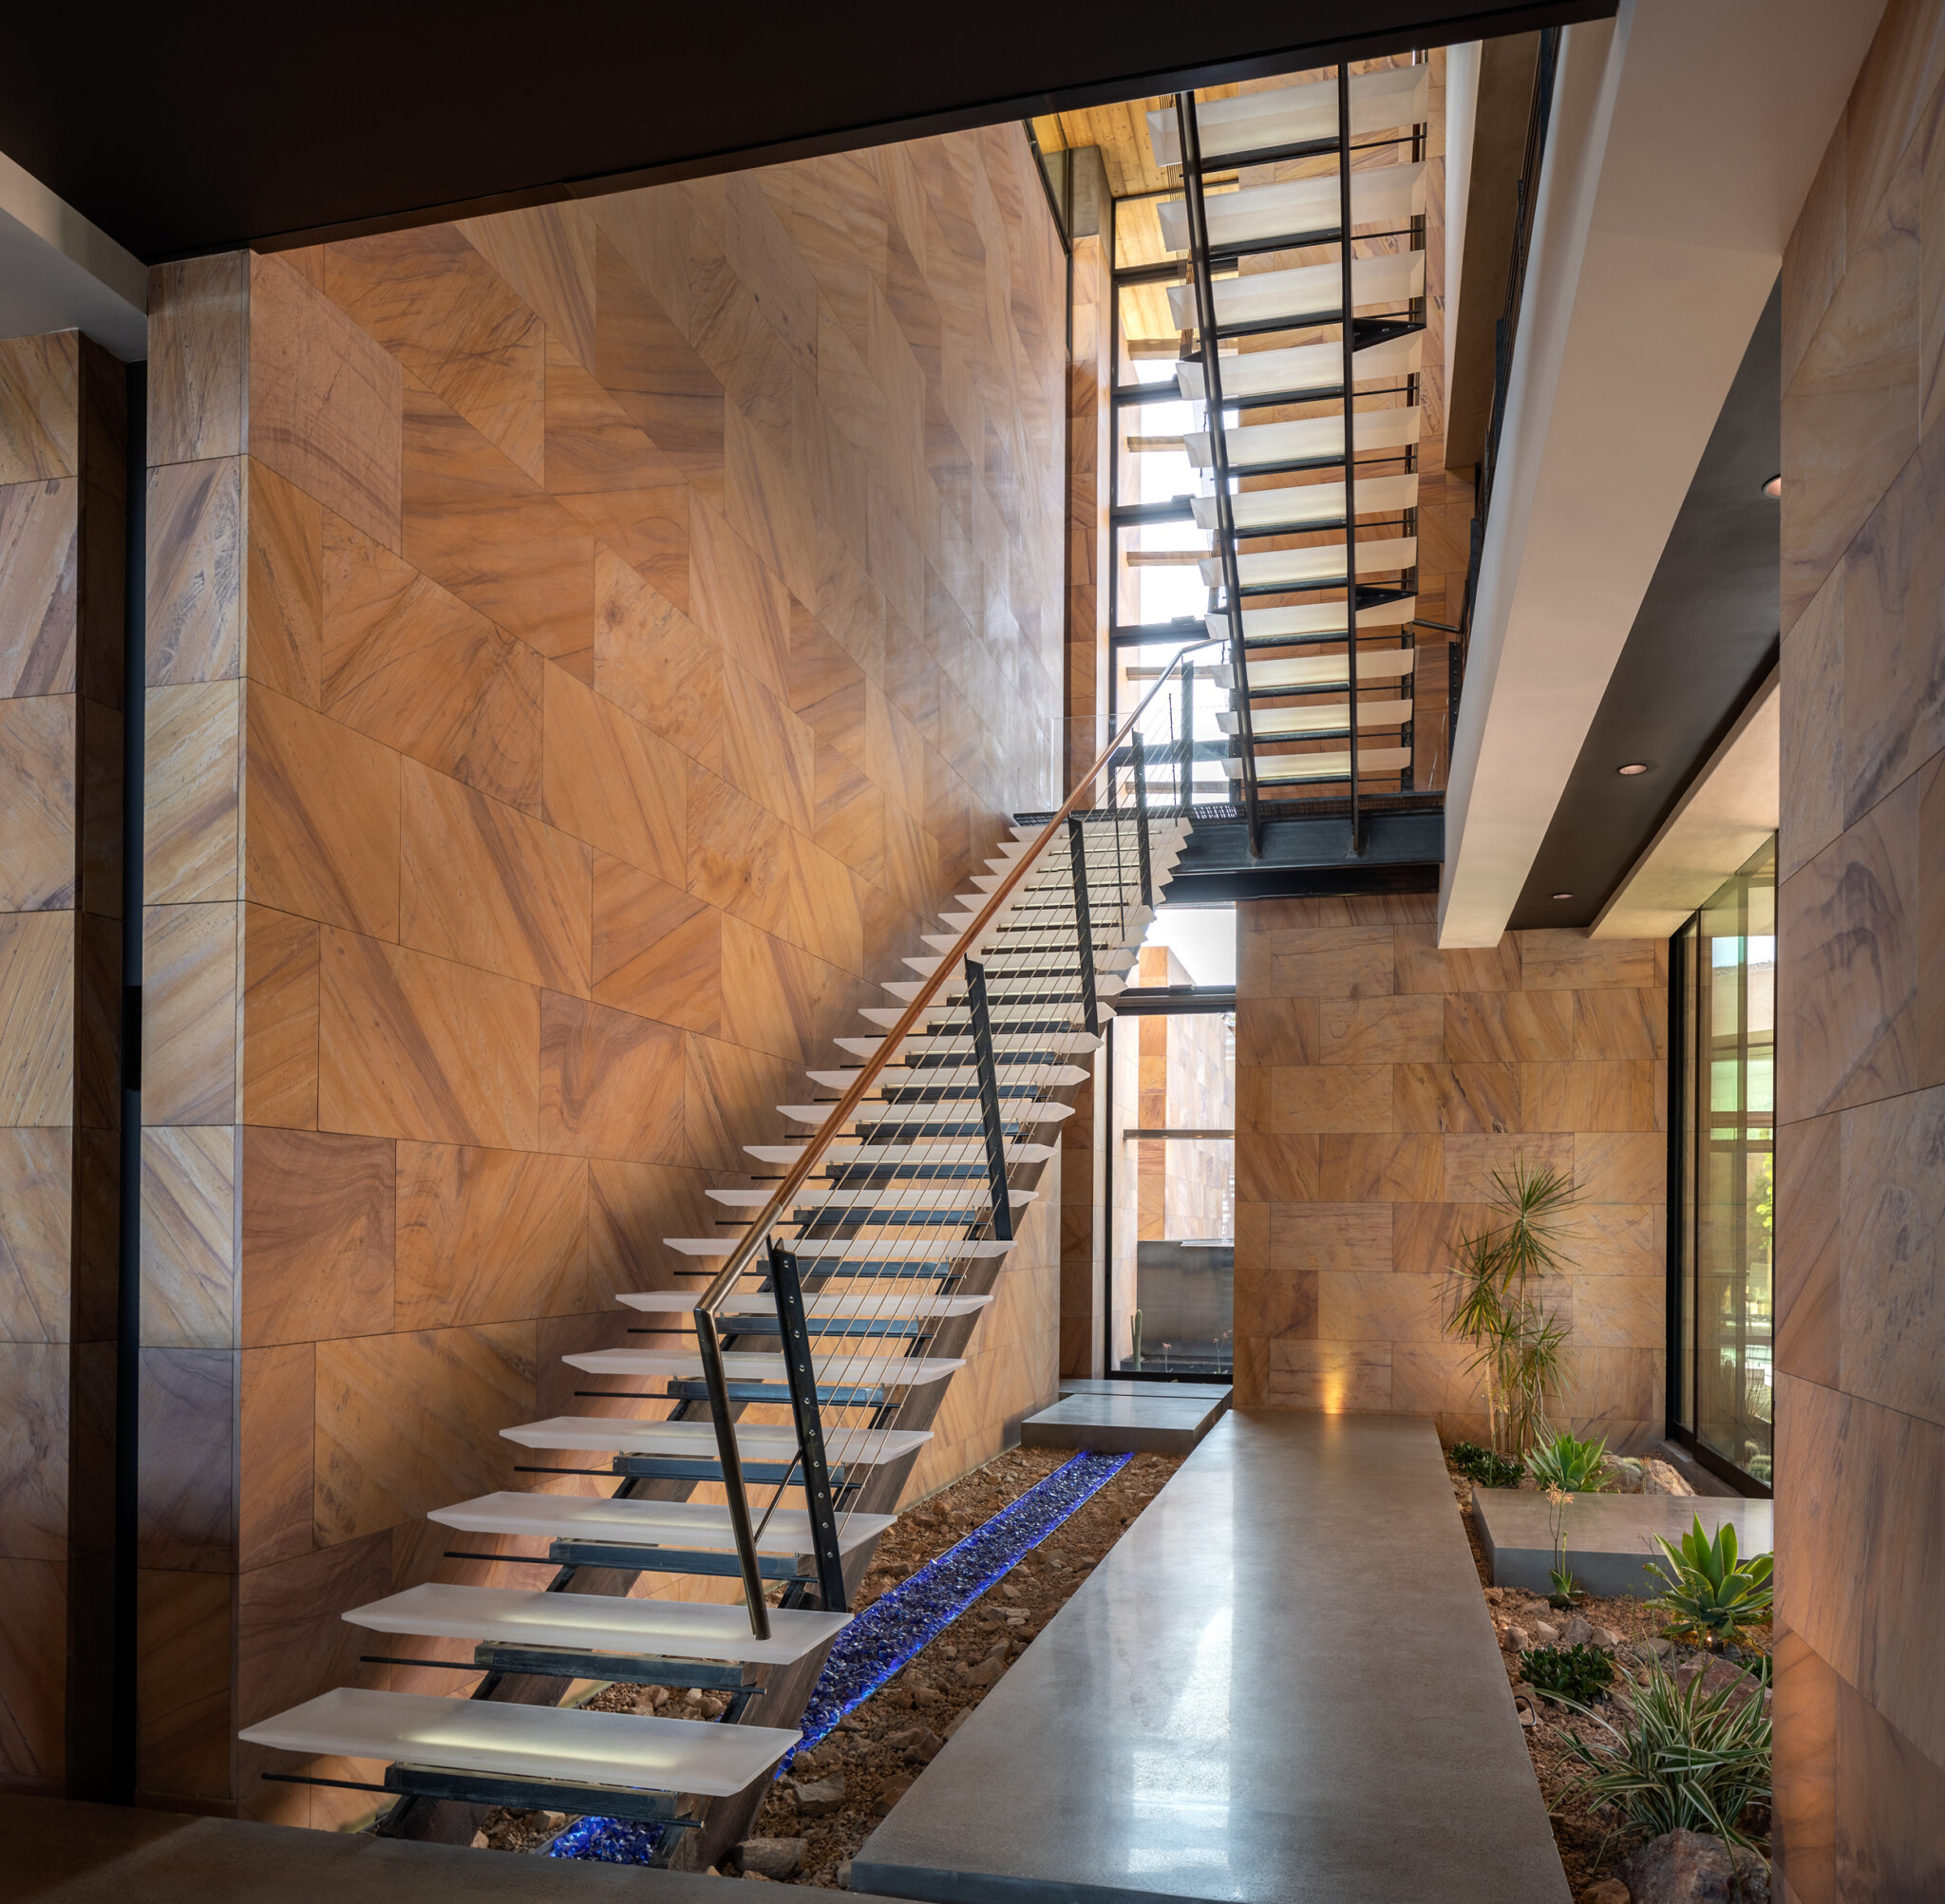 A custom home interior featuring a free standing metal staircase created by stairs contractor, JD Stairs